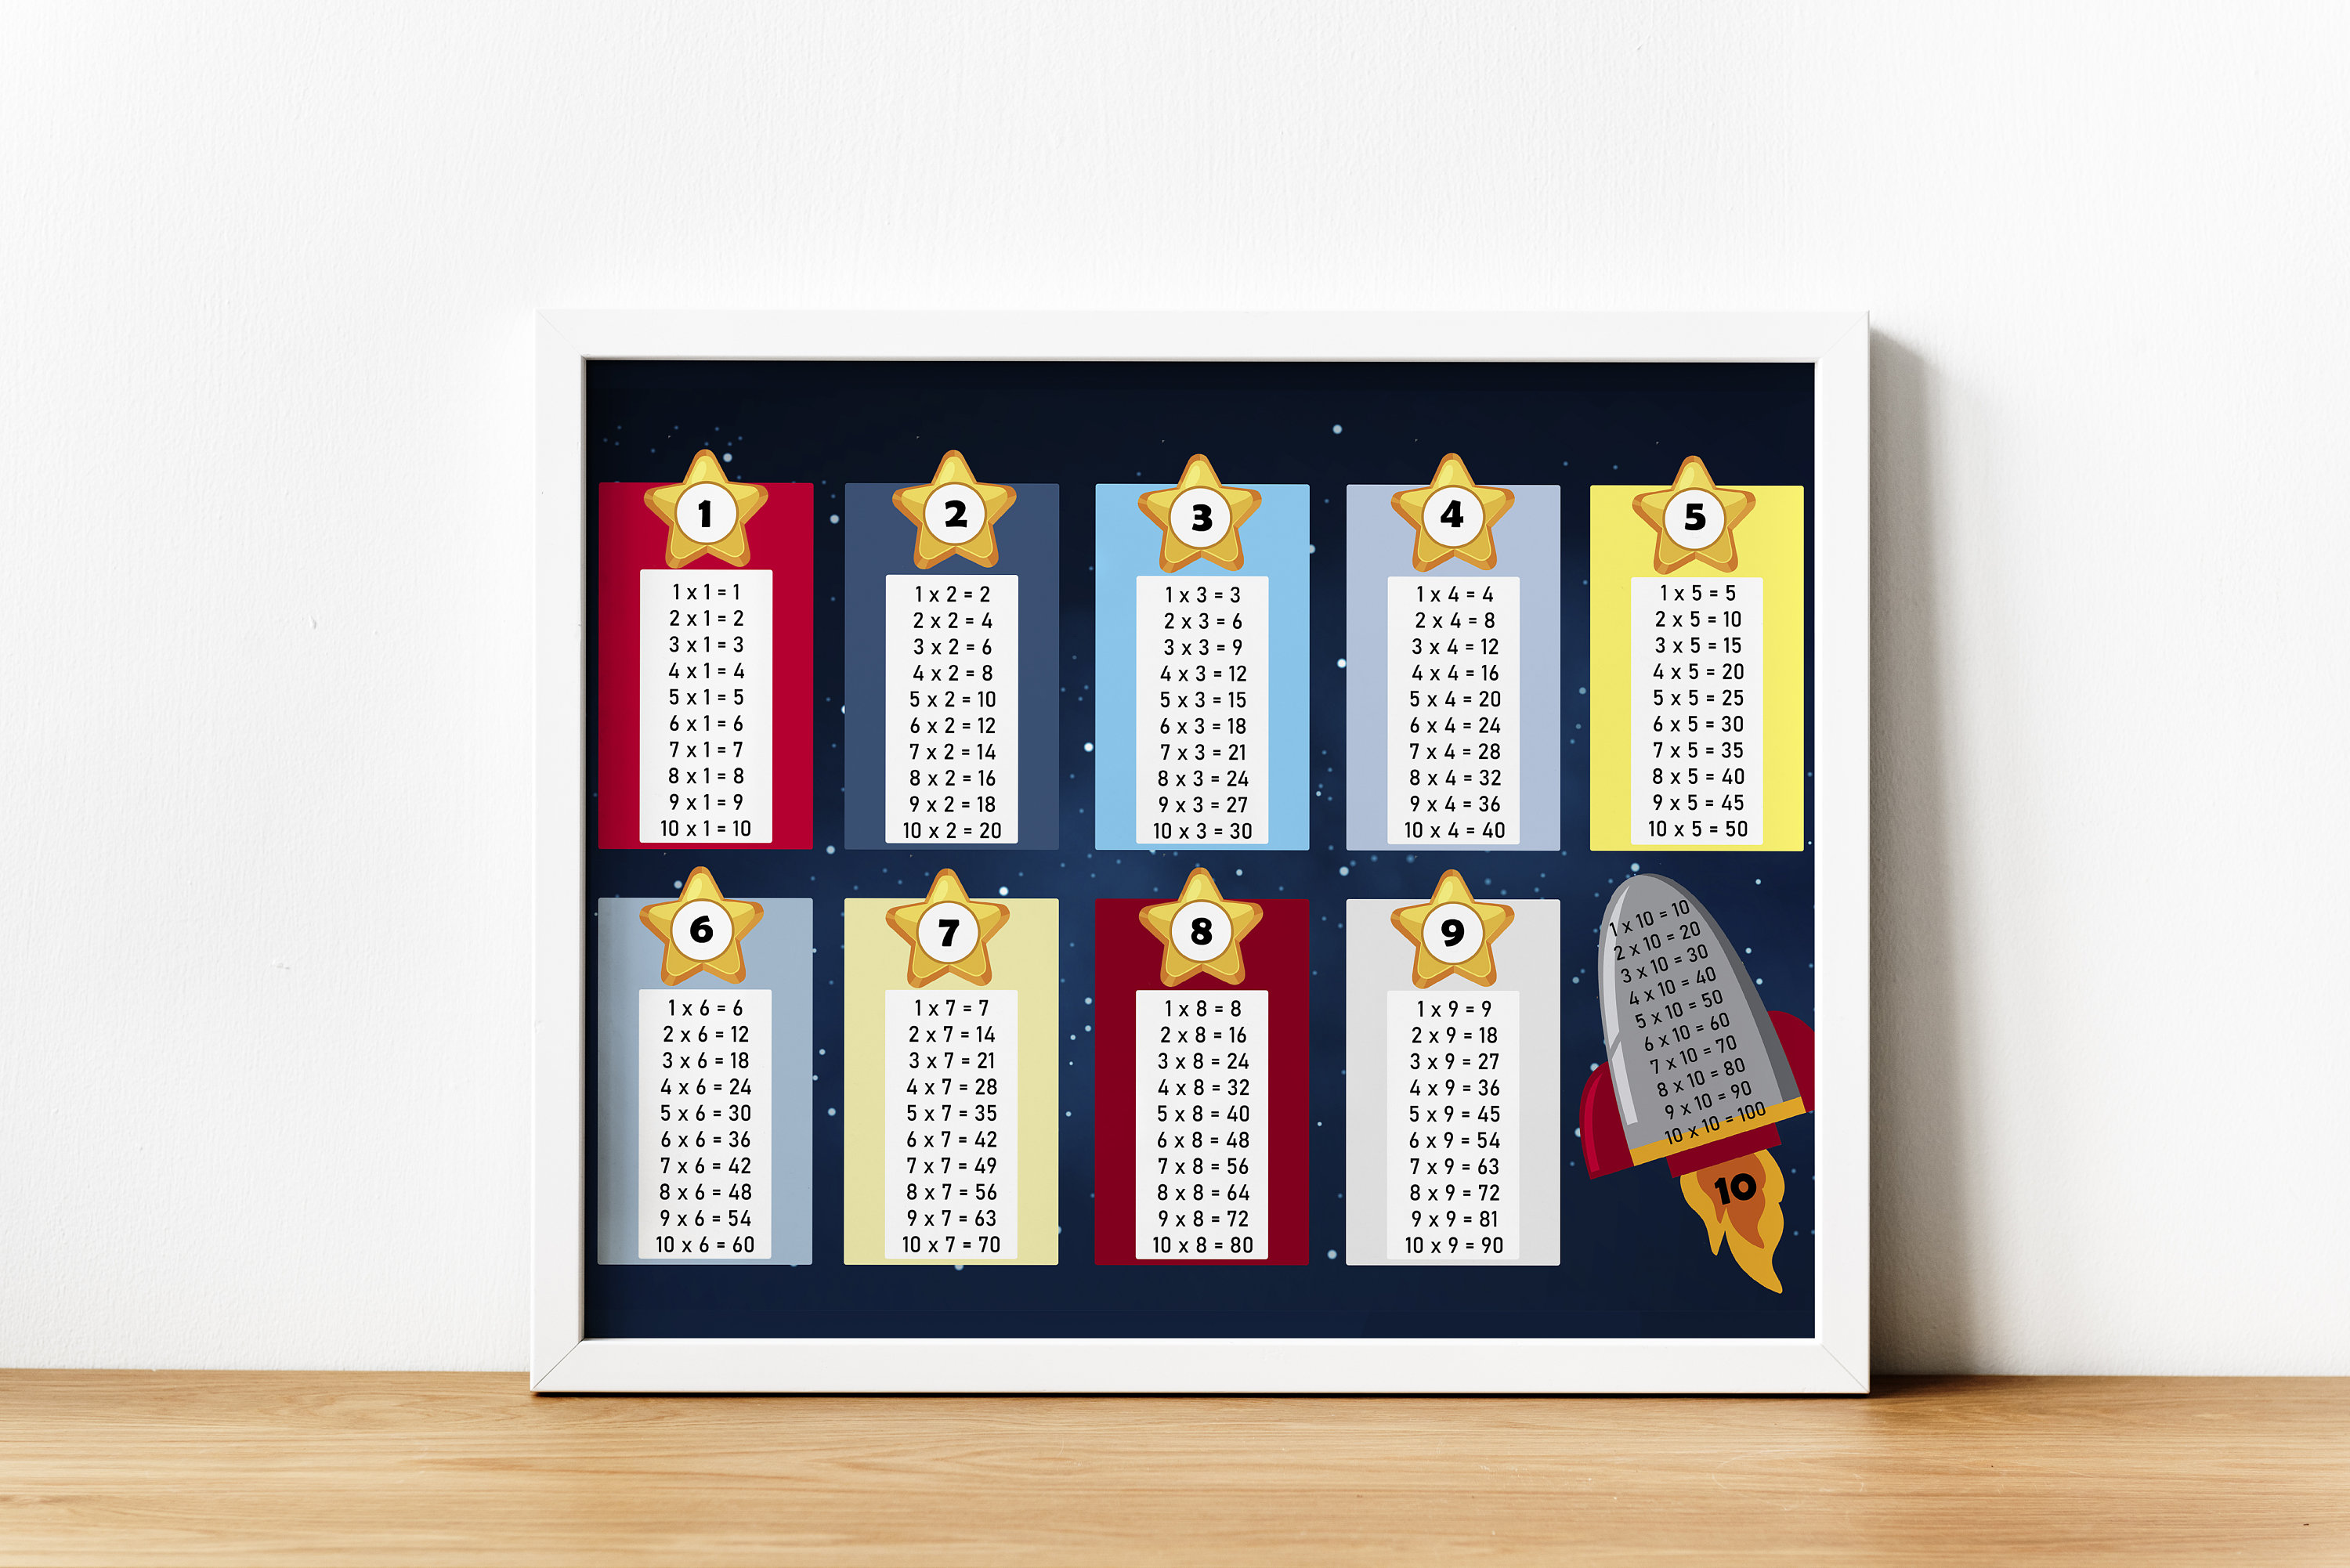 Multiplication Times Tables Poster 24x36